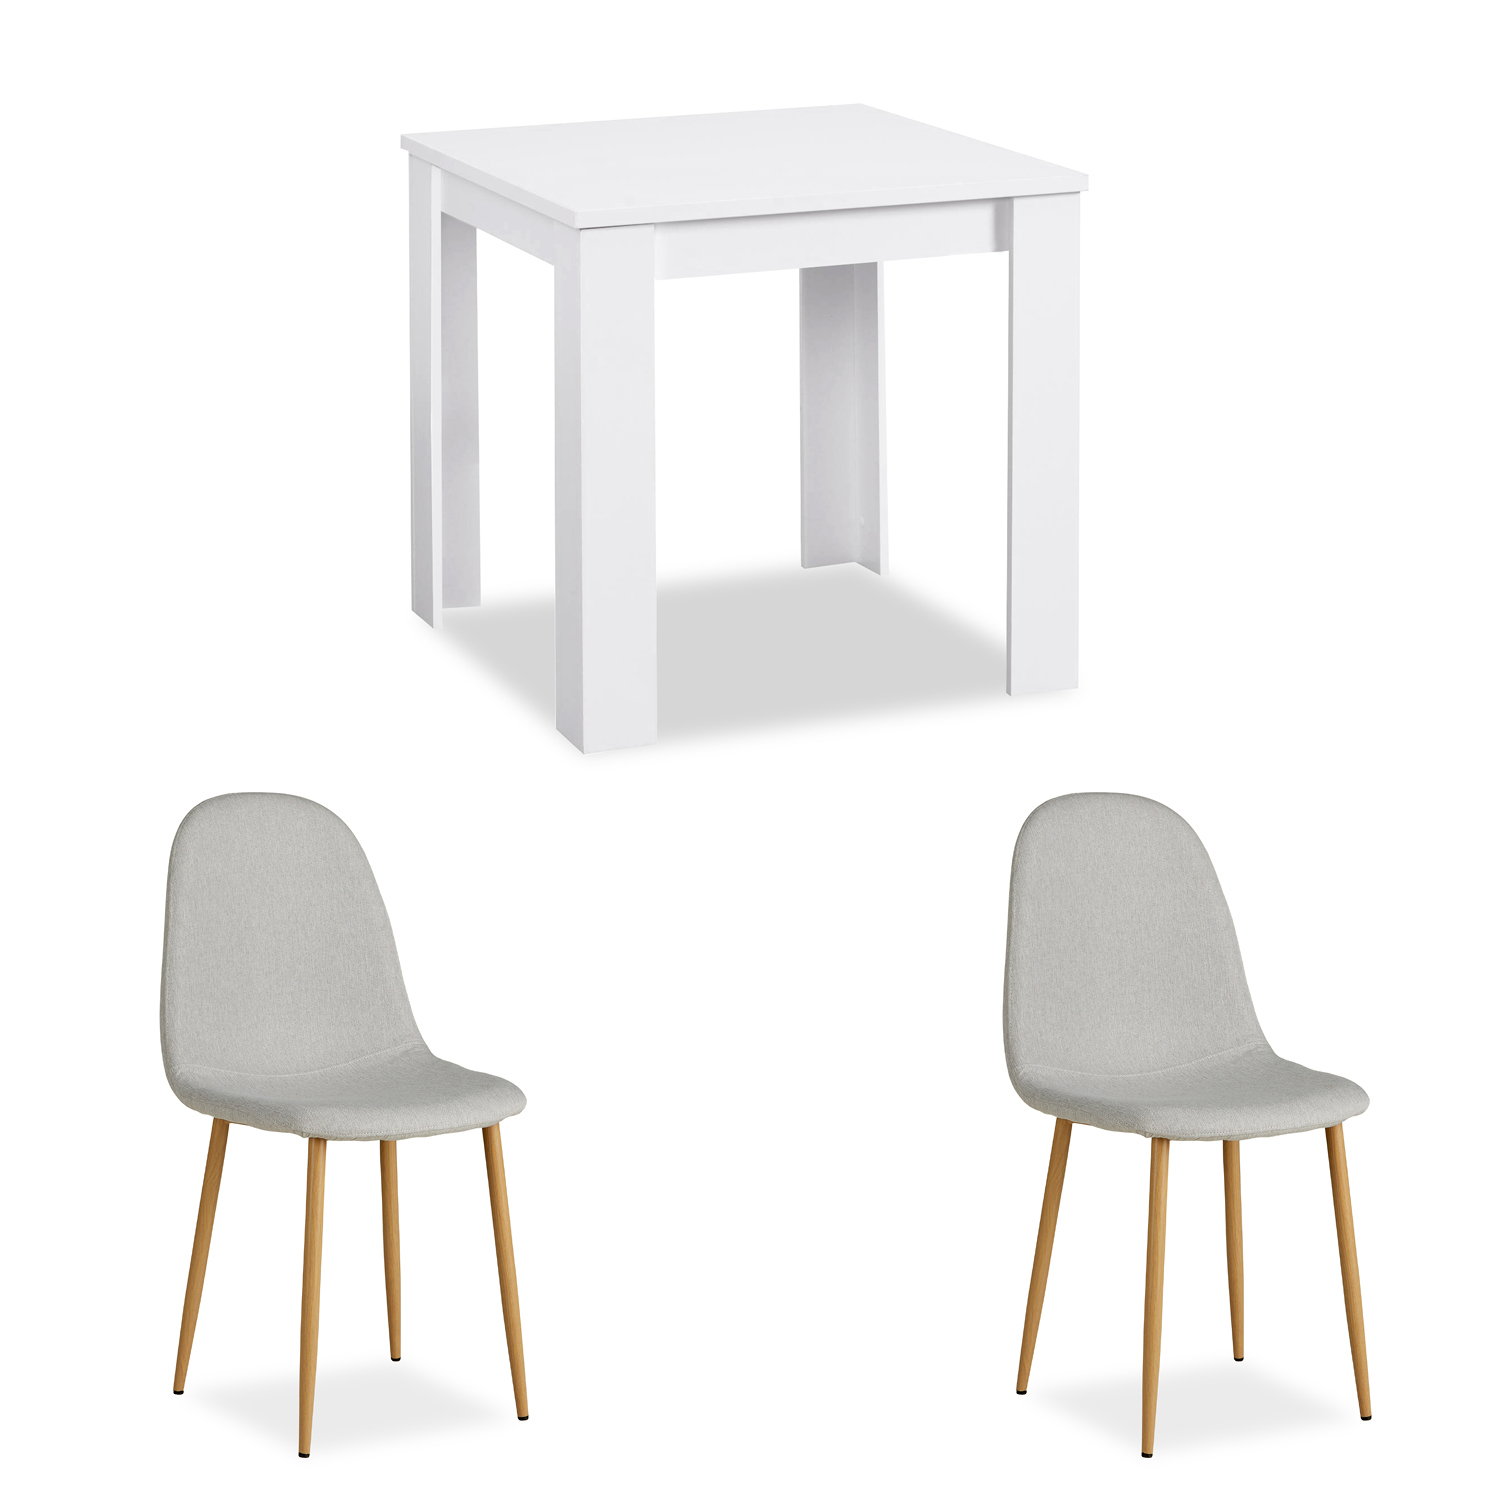 Modern Dining Table White 80x80 cm with 2 Chairs Grey Dining Room Table Wooden Table